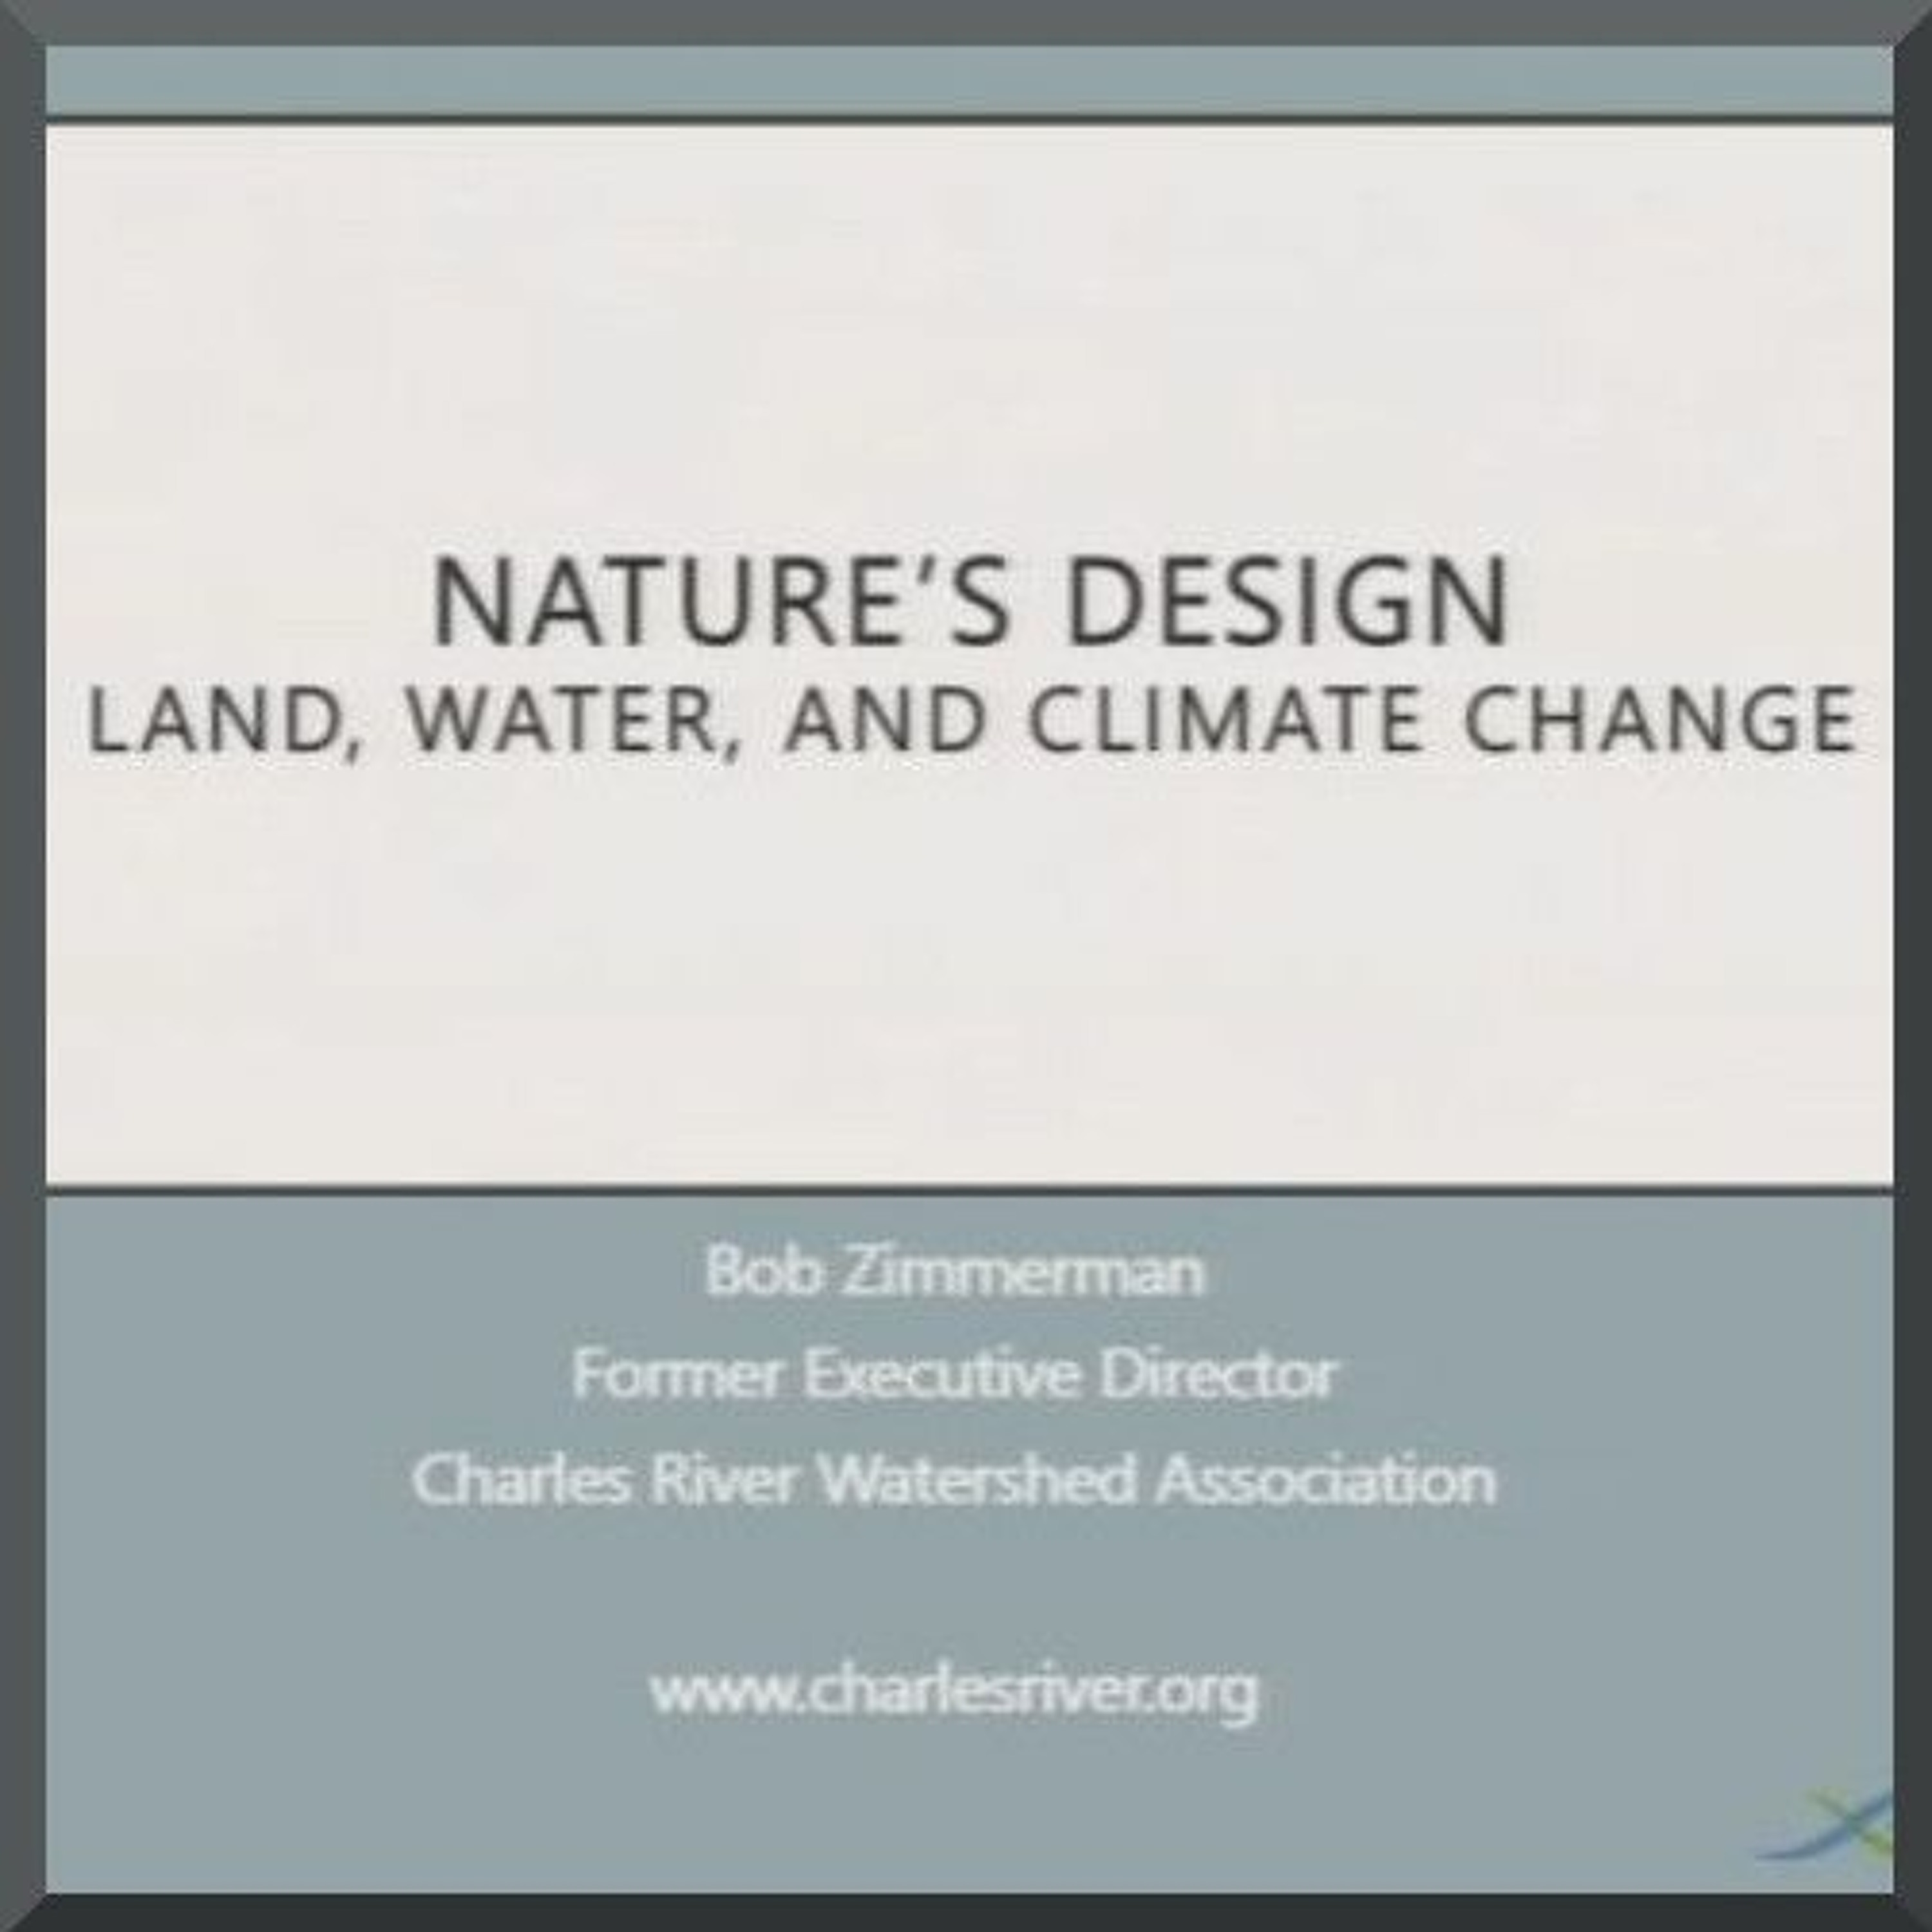 Robert Zimmerman, Jr., “Nature’s Design: Land, Water, and Climate Change in Boston”